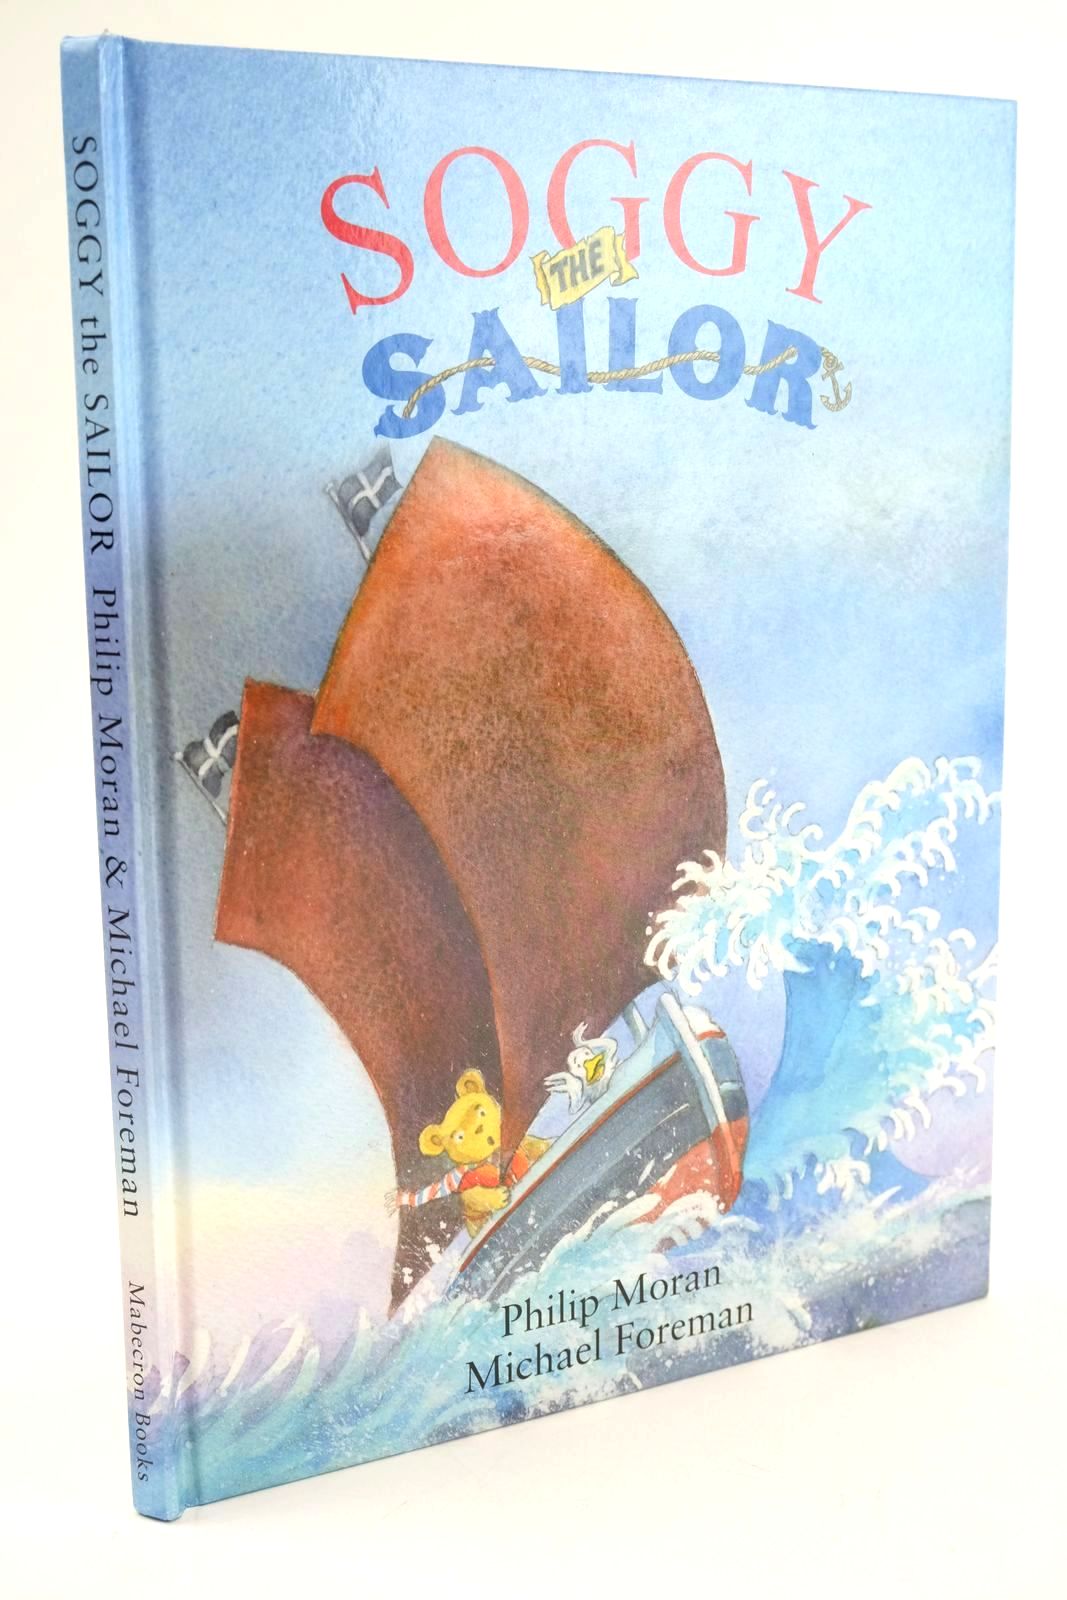 Photo of SOGGY THE SAILOR written by Moran, Philip illustrated by Foreman, Michael published by Mabecron Books (STOCK CODE: 1325061)  for sale by Stella & Rose's Books